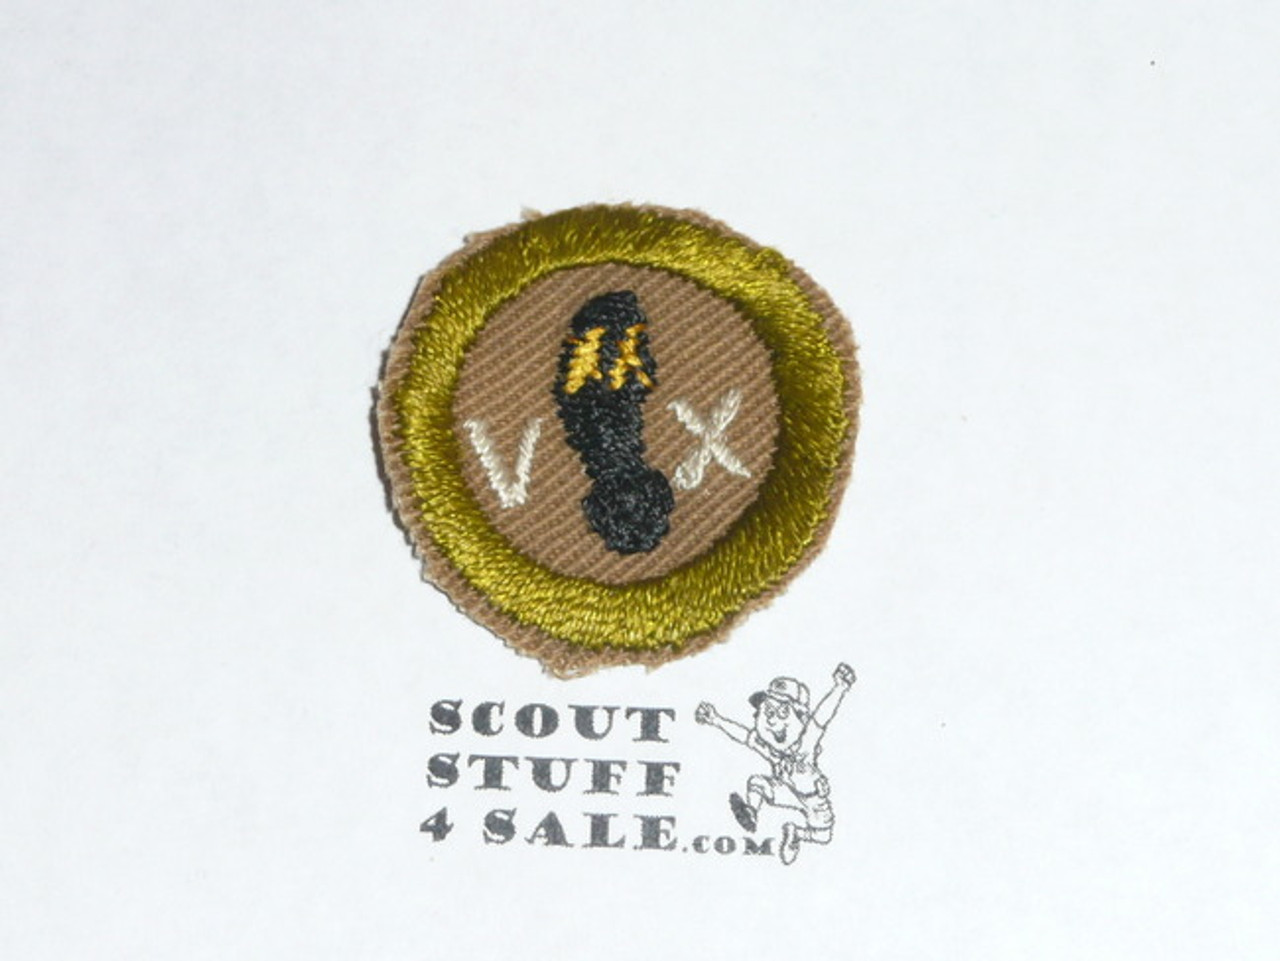 Hiking - Type A - Square Tan Merit Badge (1911-1933), cut to round or little material